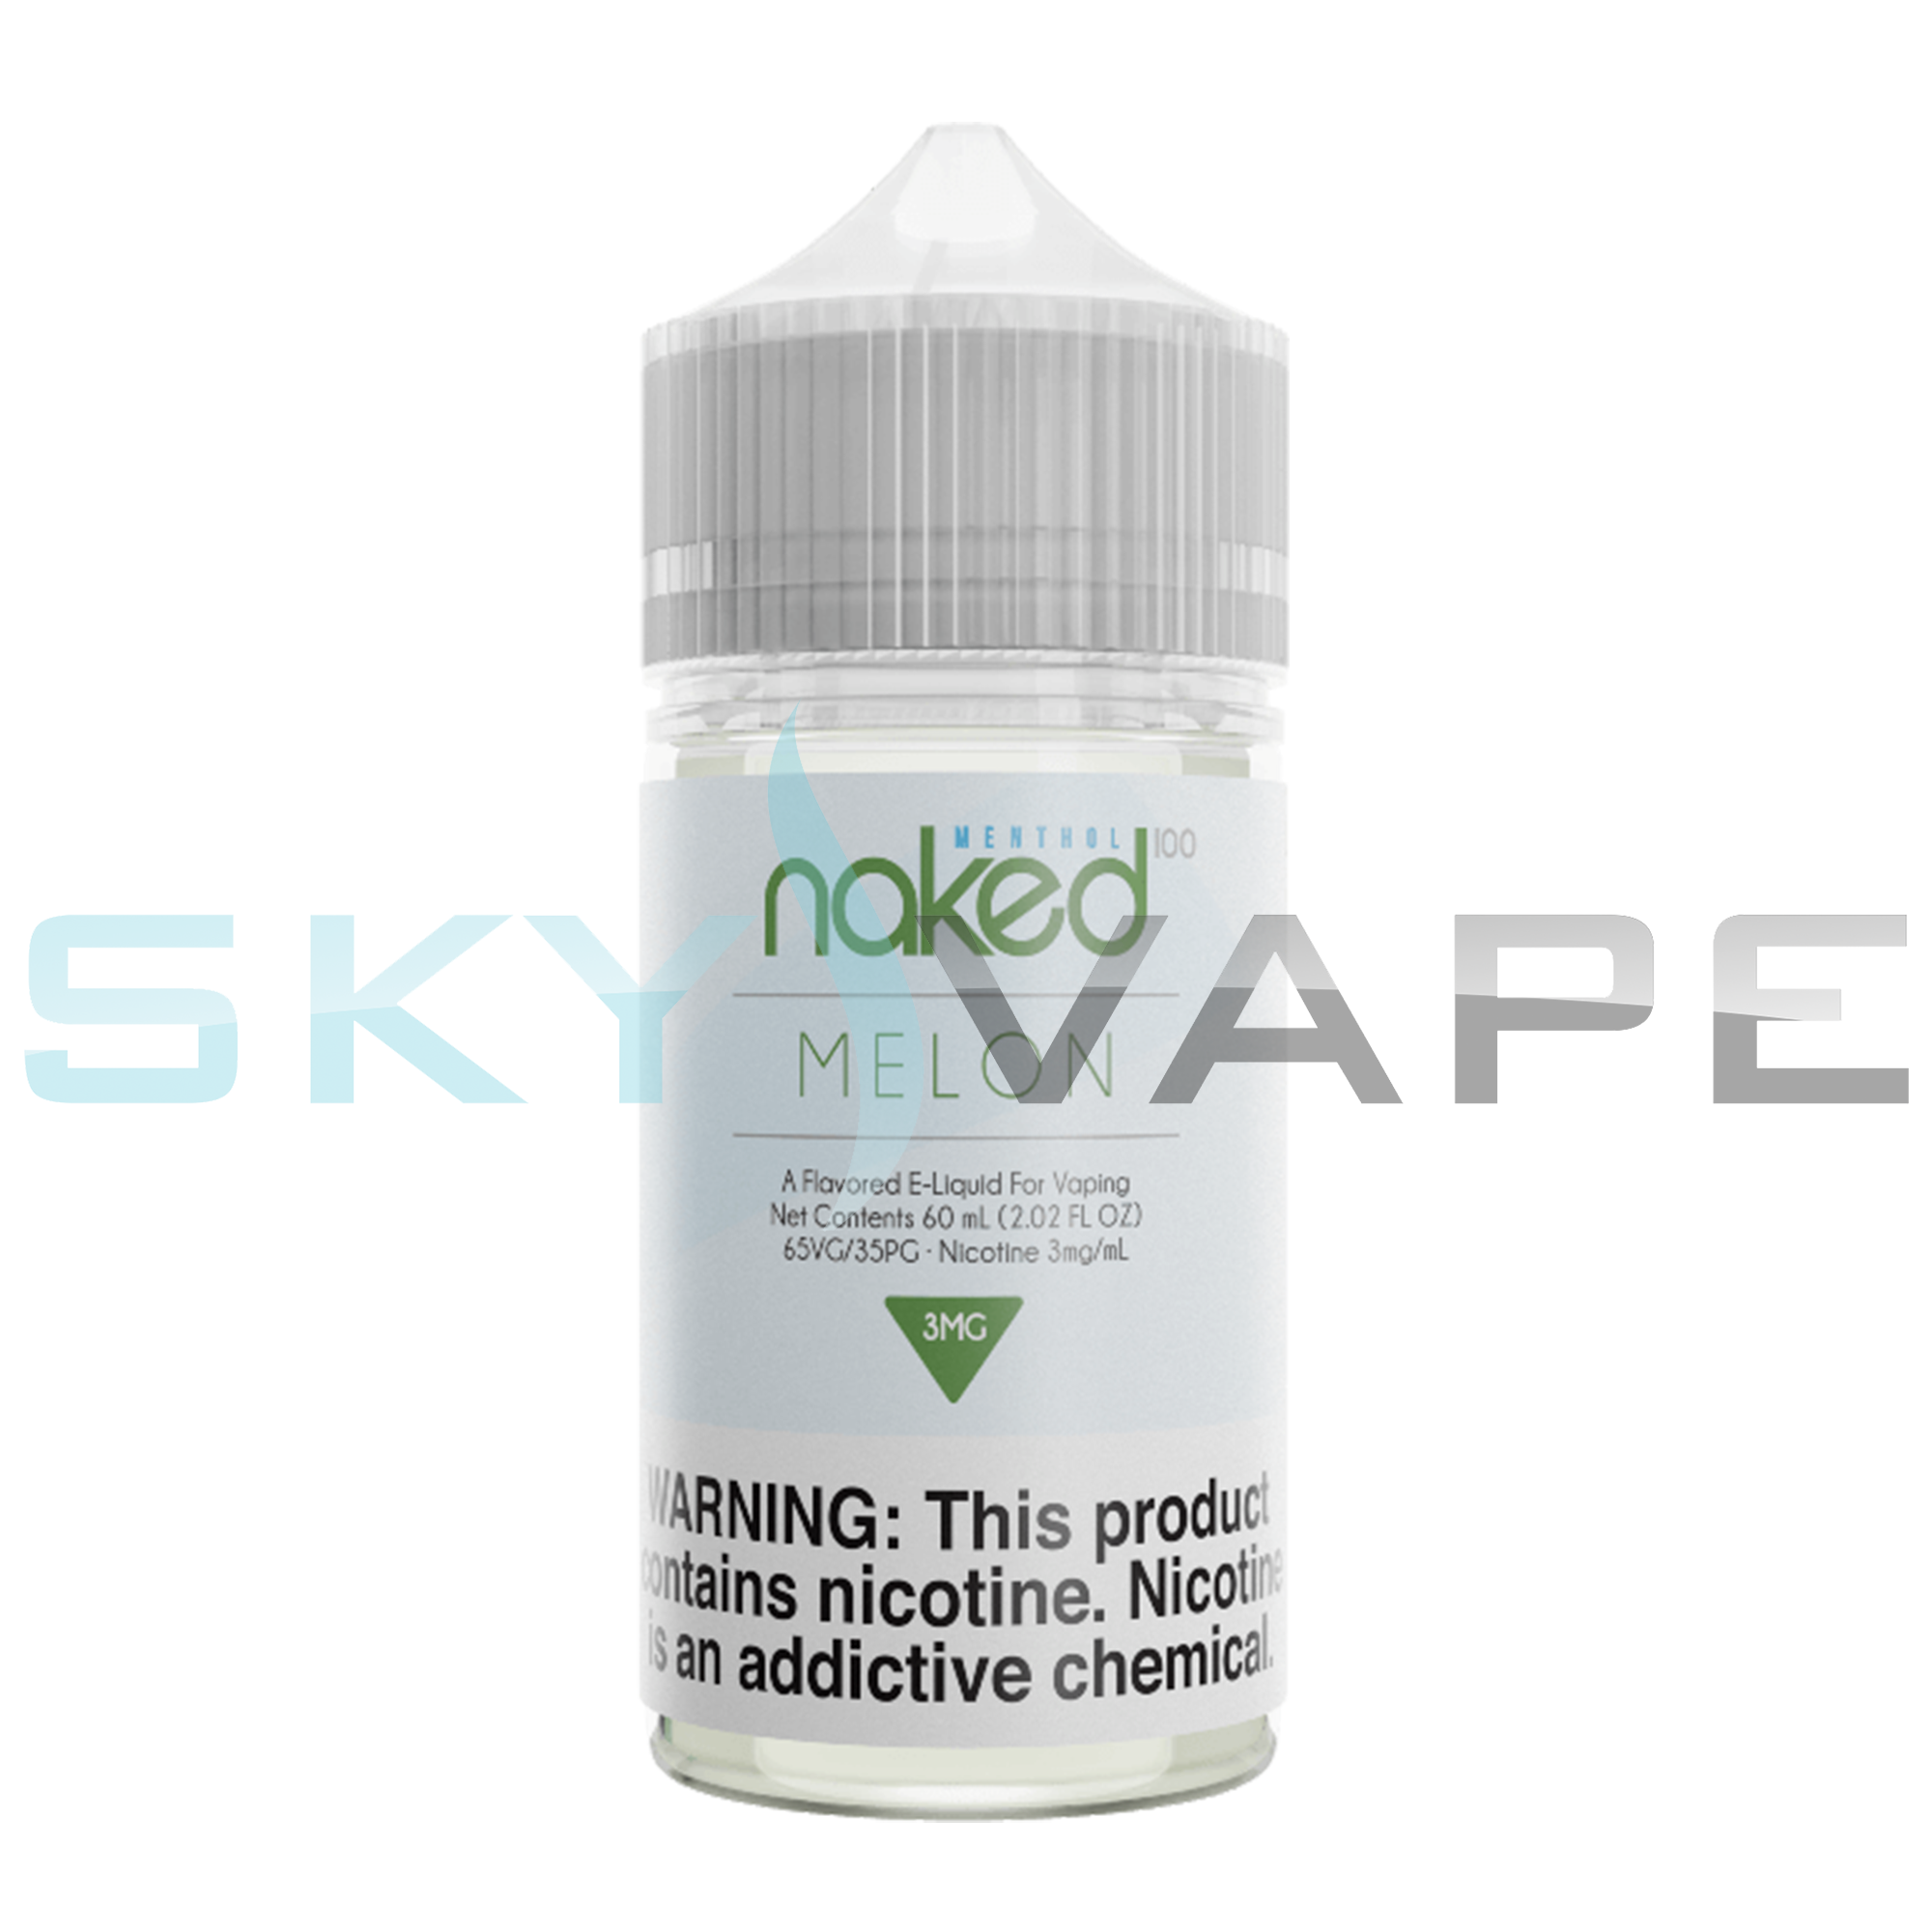 Naked 100 Menthol Ejuice Melon 60ML (Formally Known As Polar Breeze or Frost Bite)